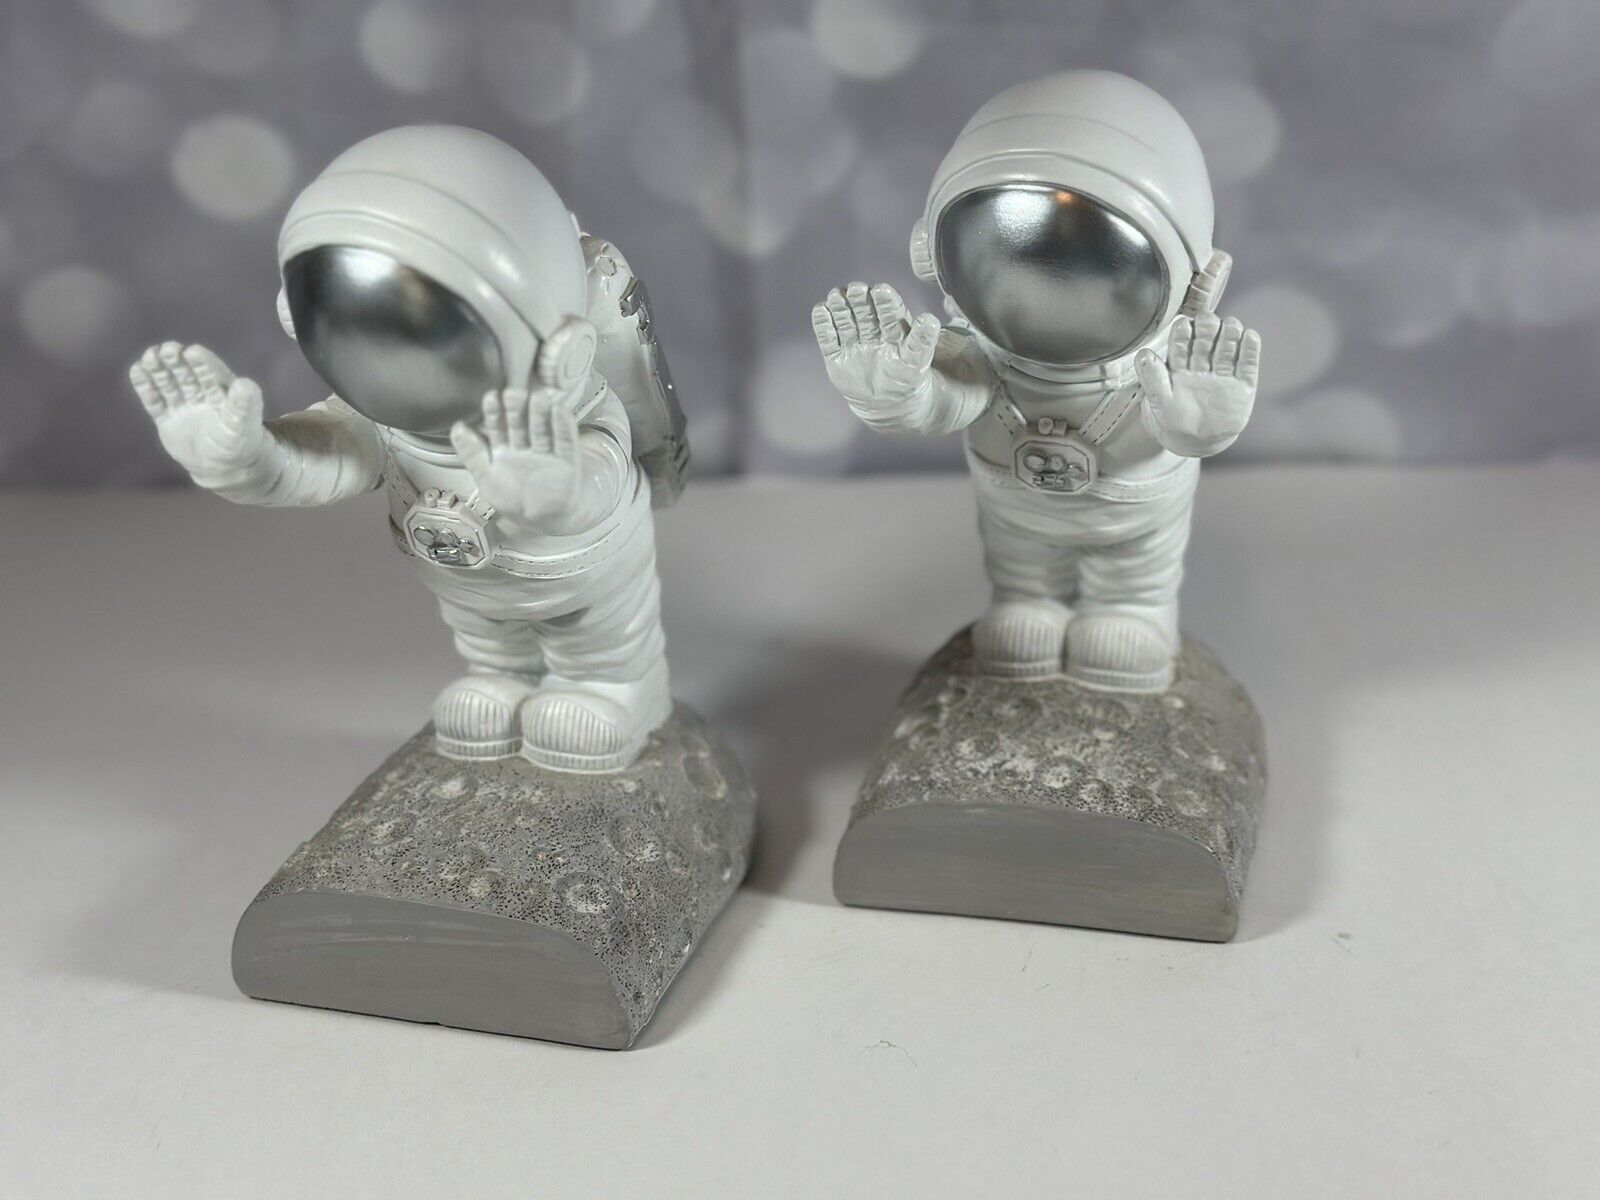 Astronaut Bookends - Book Ends to Hold Books - Space Decor Bookends for Kids Roo